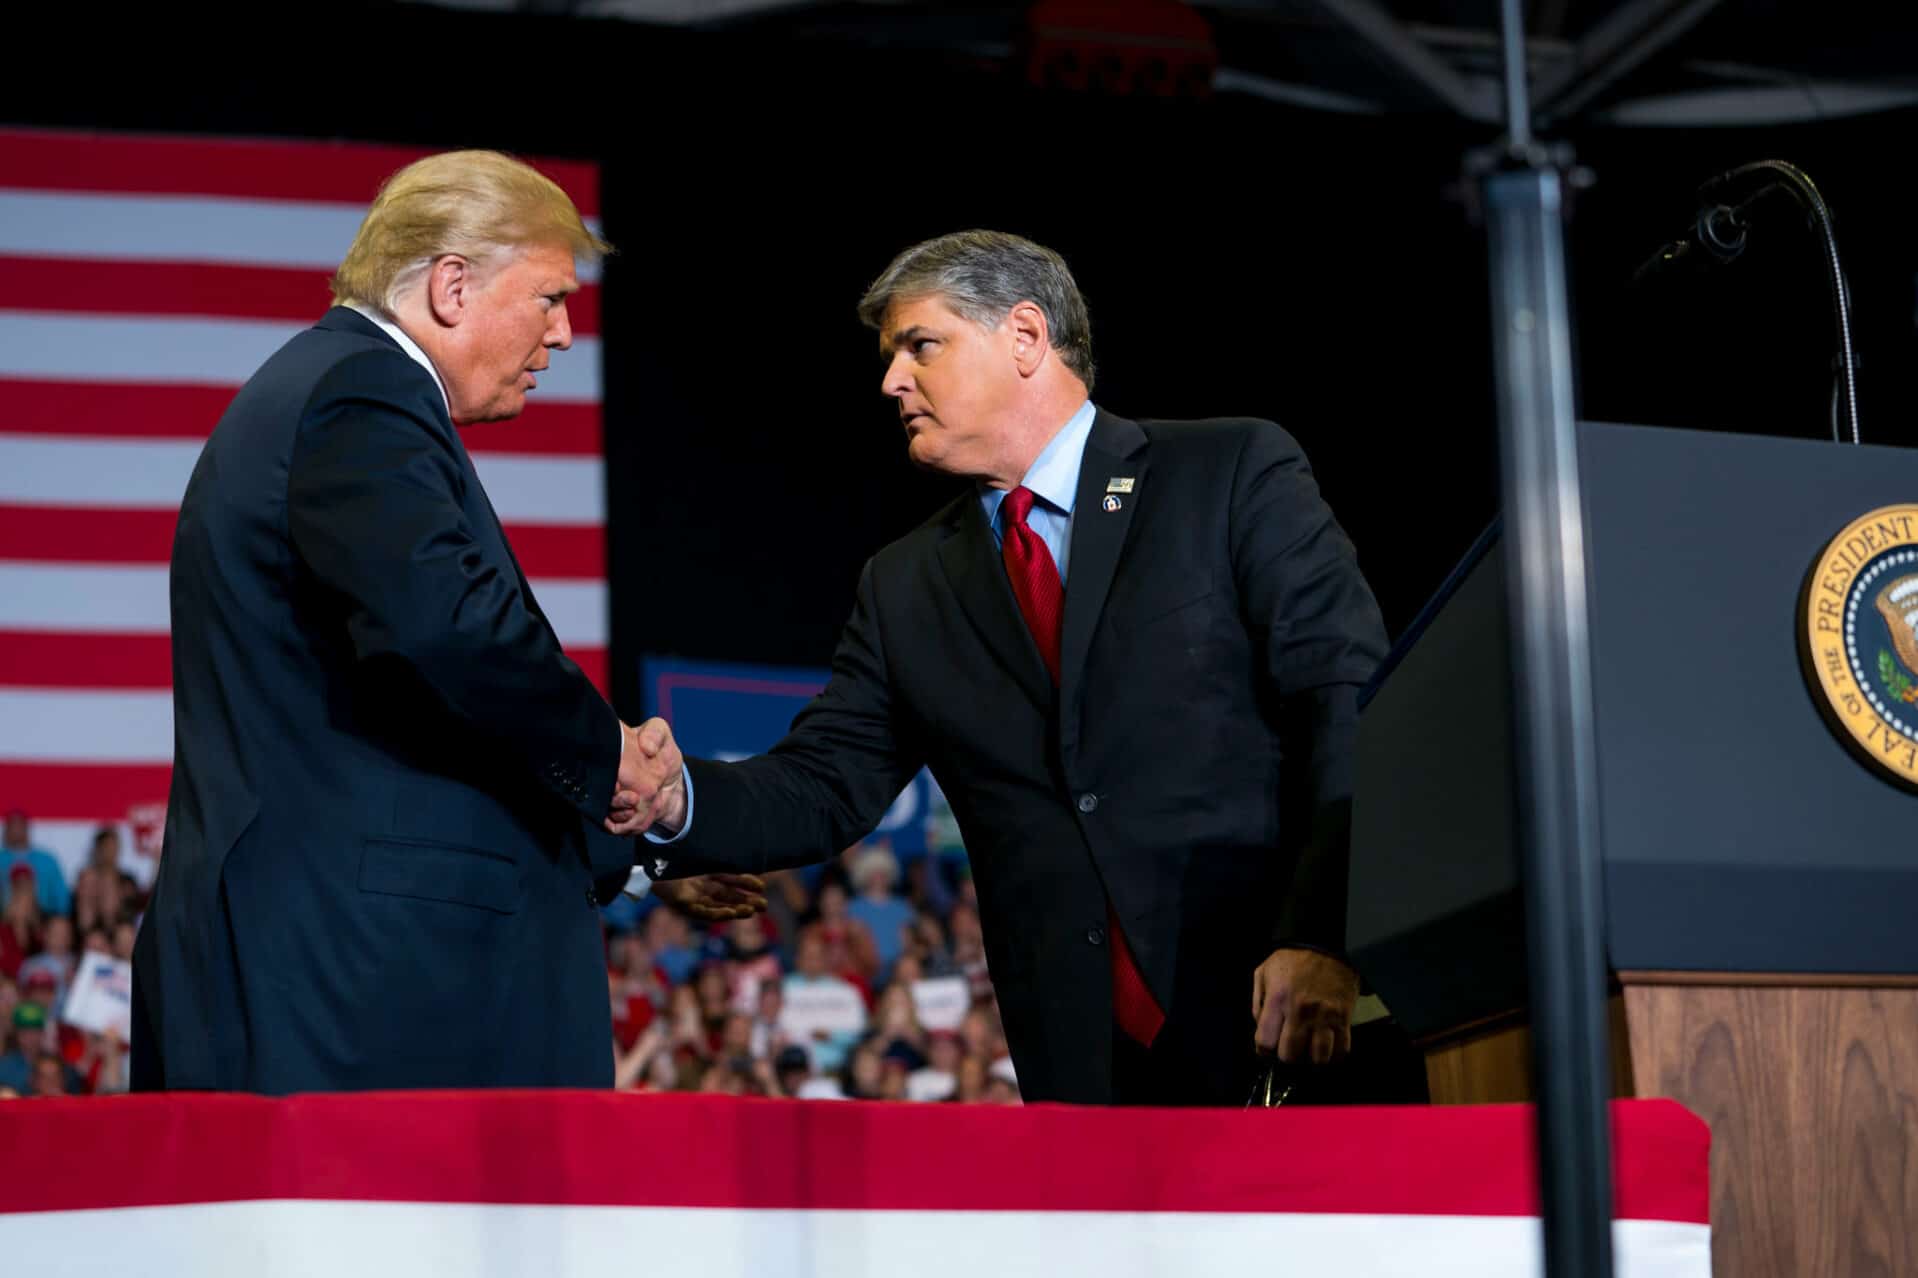 Sean Hannity supporting Donald Trump raised eyebrows